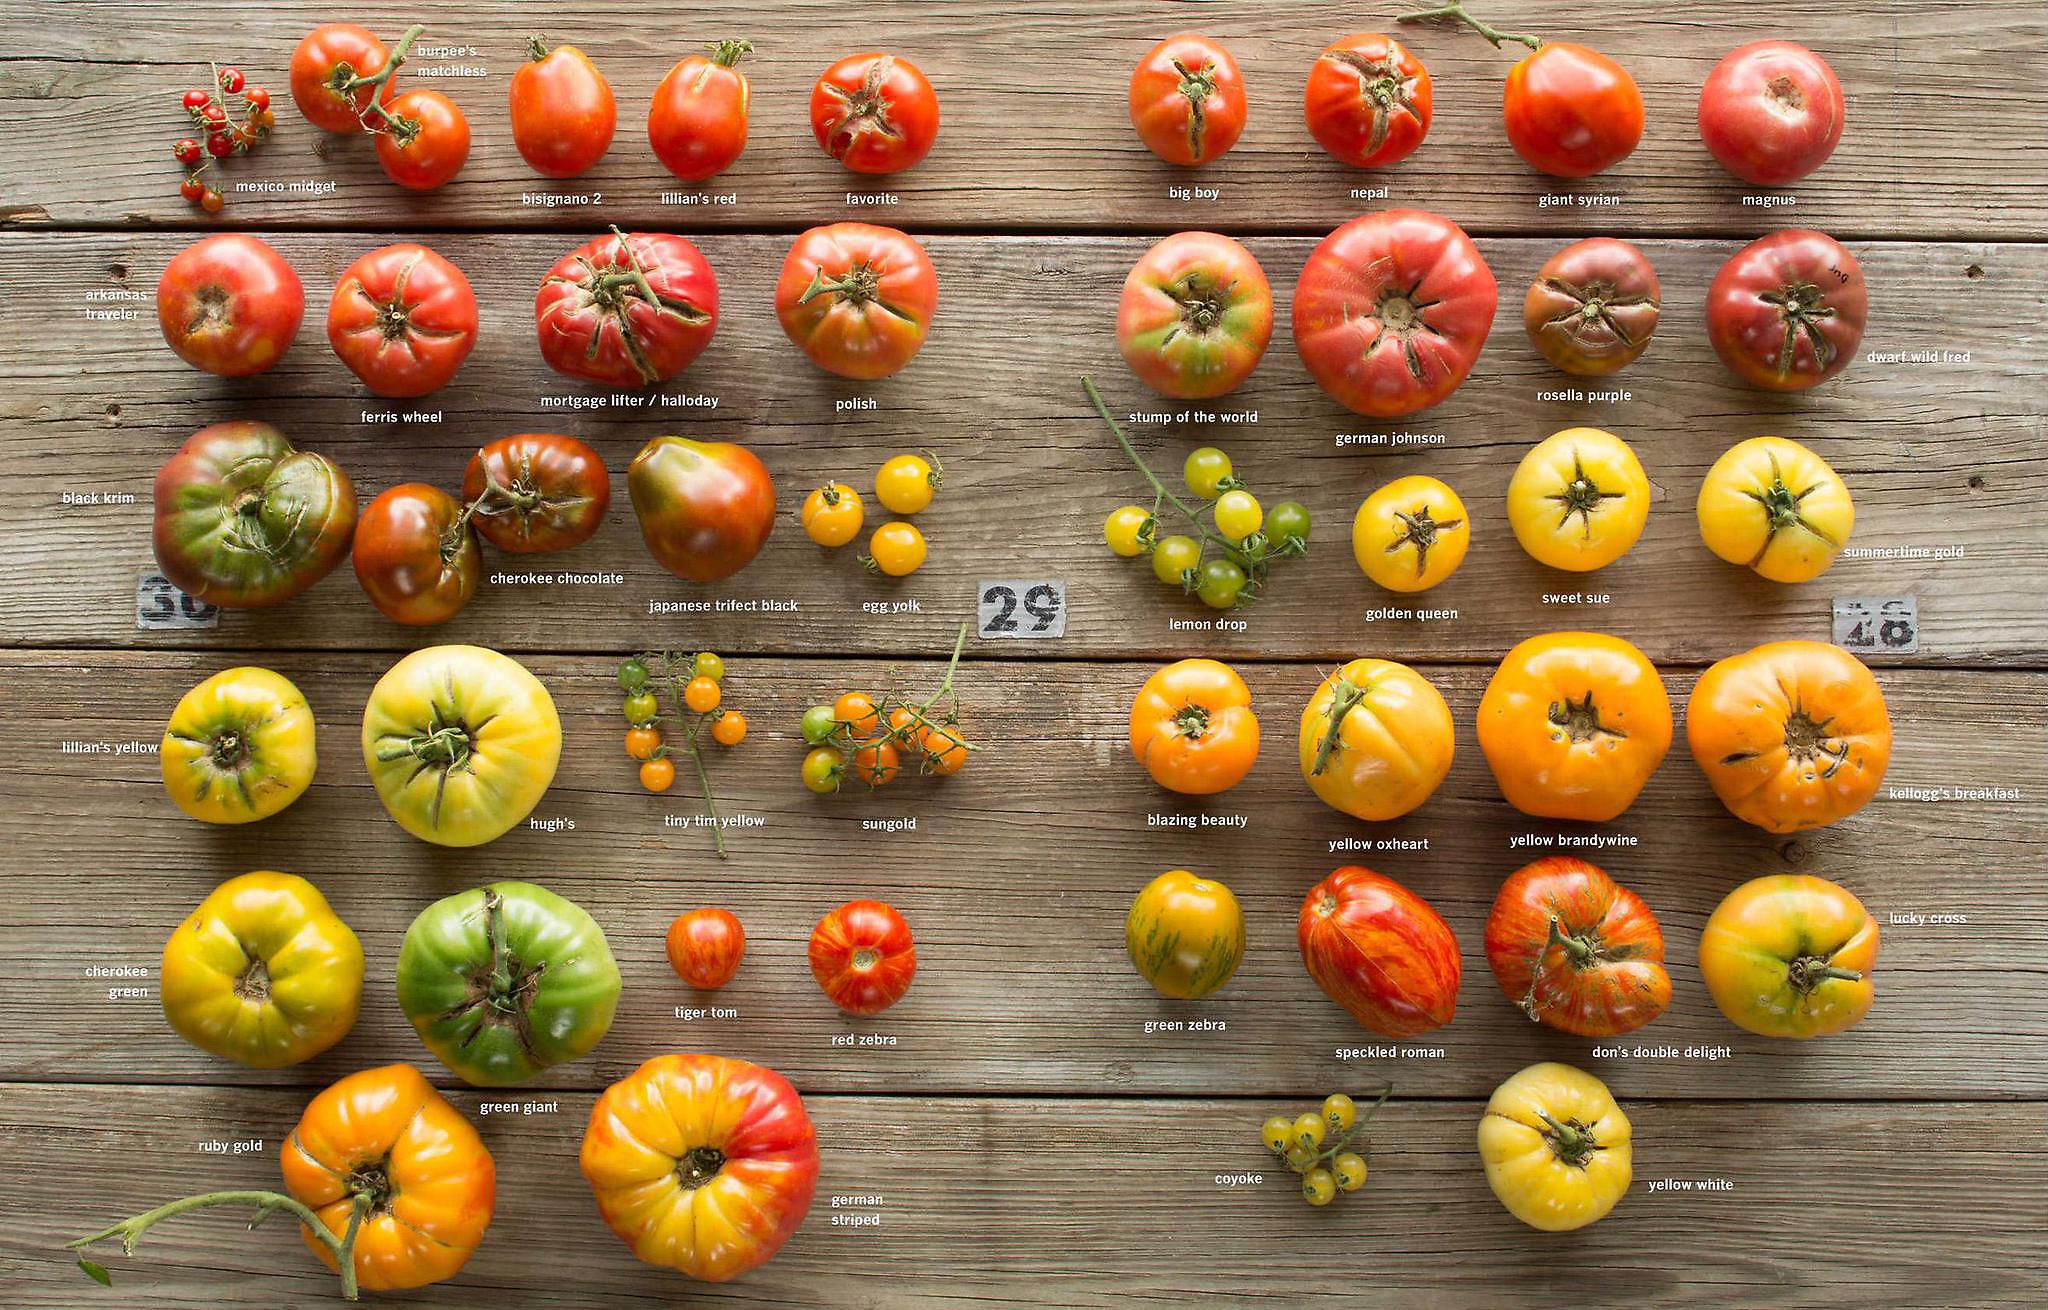 From Craig LeHoullier's book Epic Tomatoes: How to Select &amp; Grow the Best Varieties of All Time.